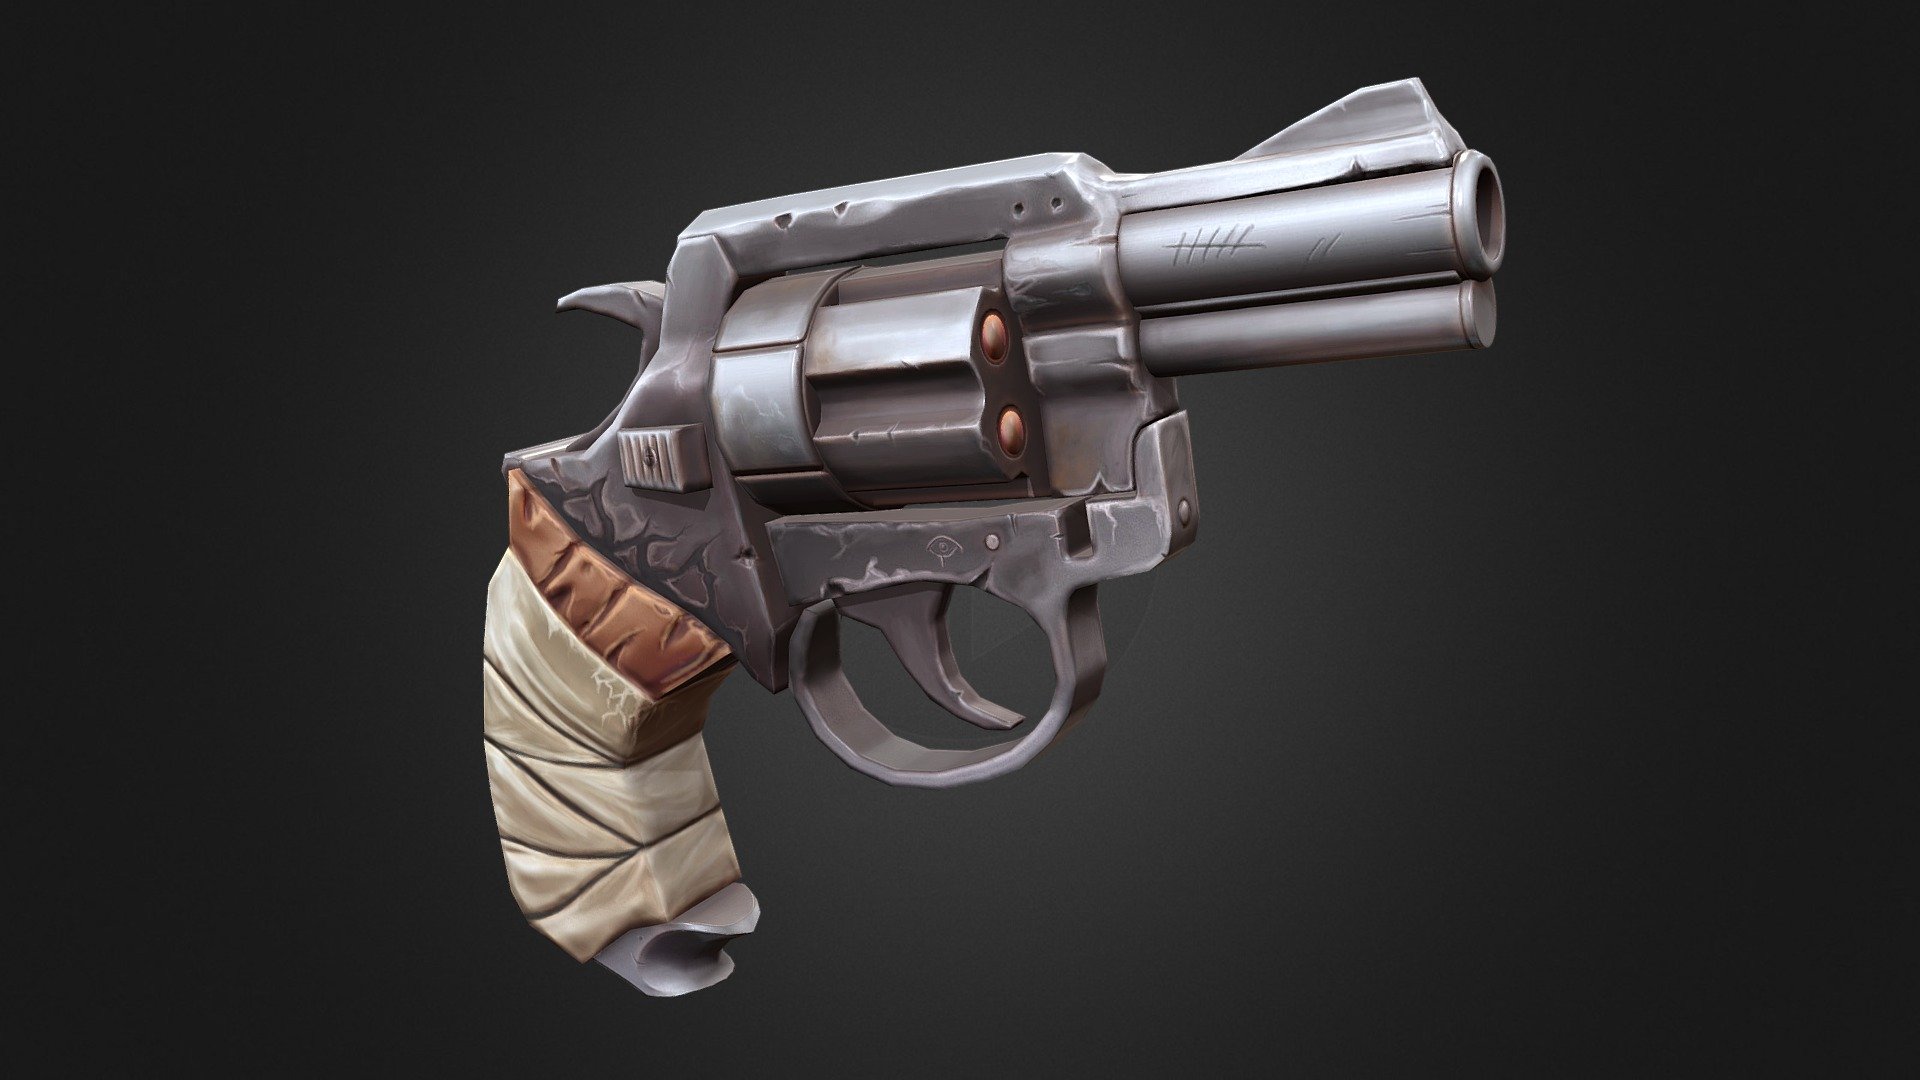 A stylized revolver prop, using a handpained diffuse texture as well as roughness and normal maps for a semi-PBR look.
Polycount: 1259 triangles
Textures: 2048x2048 (Diffuse, Normal, Roughness)

Artstation post: https://www.artstation.com/artwork/8b5dVG

Based on the concept art by Olekzandr Zahorulko: https://www.artstation.com/artwork/OyPwPv - Stylized Revolver Prop - 3D model by Vladimir Hashchyshyn (@VladimirHashchyshyn) 3d model